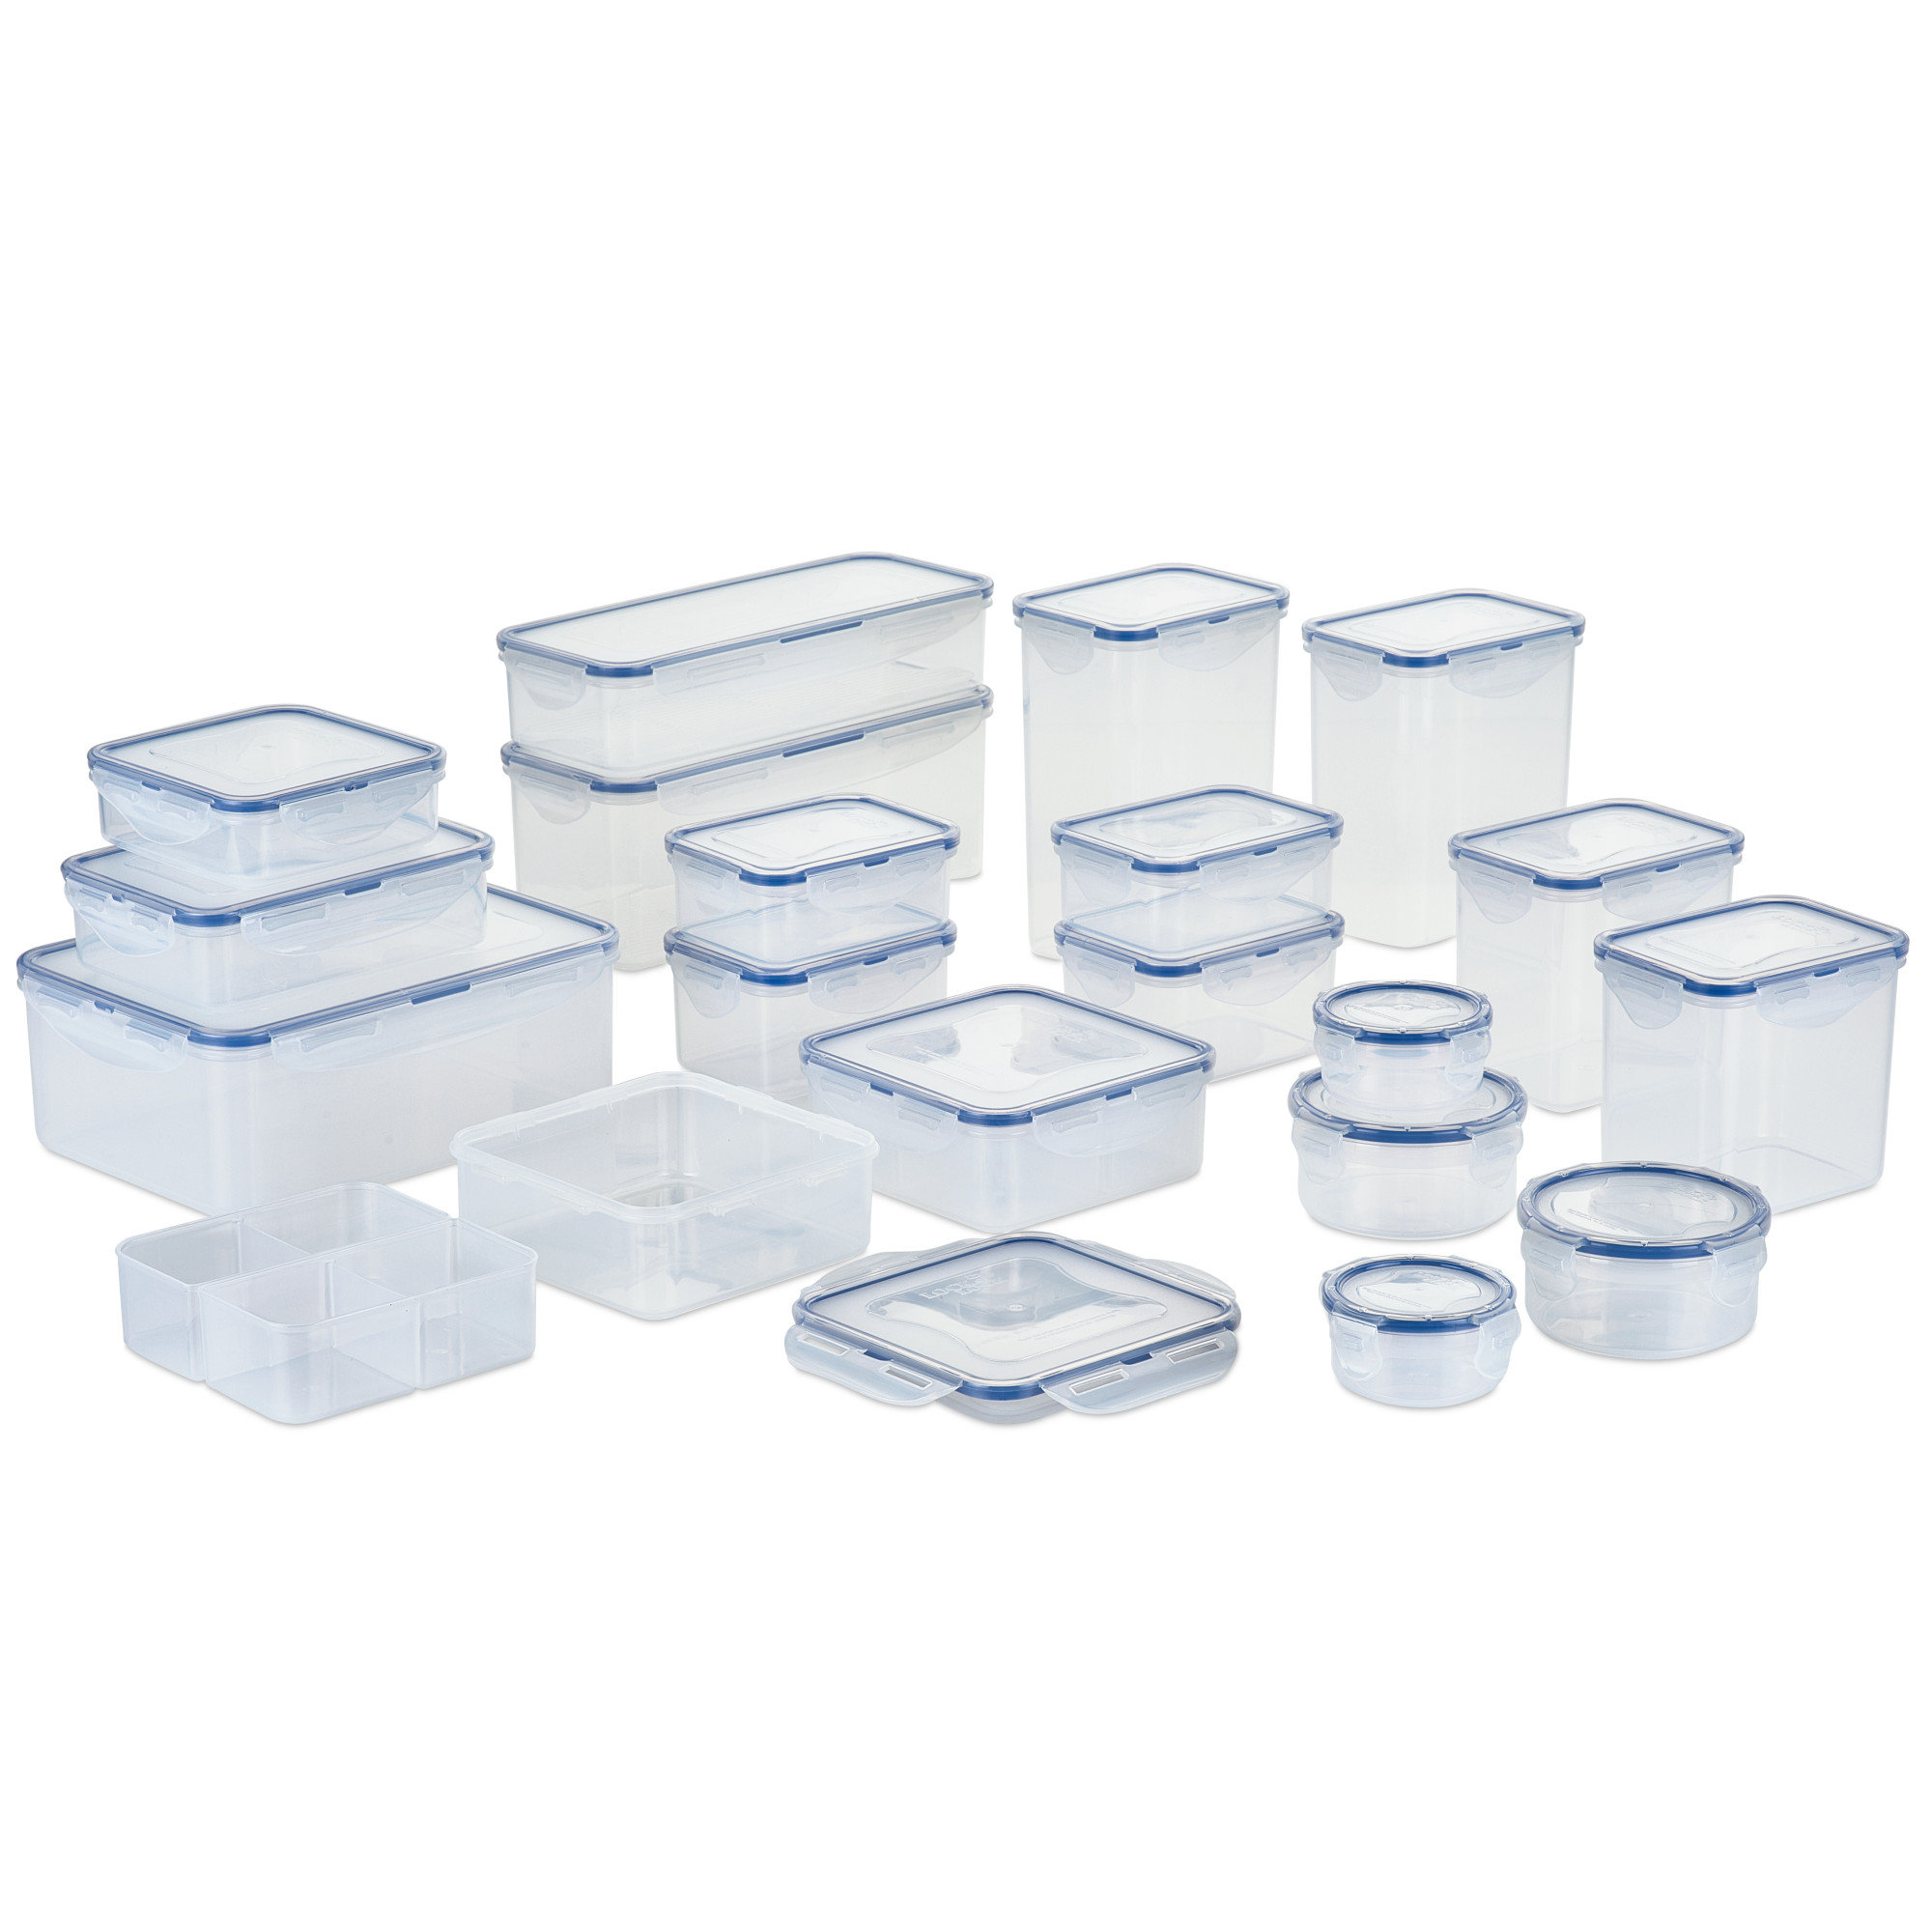 Lot - Snapware 38 Piece Food Storage Containers